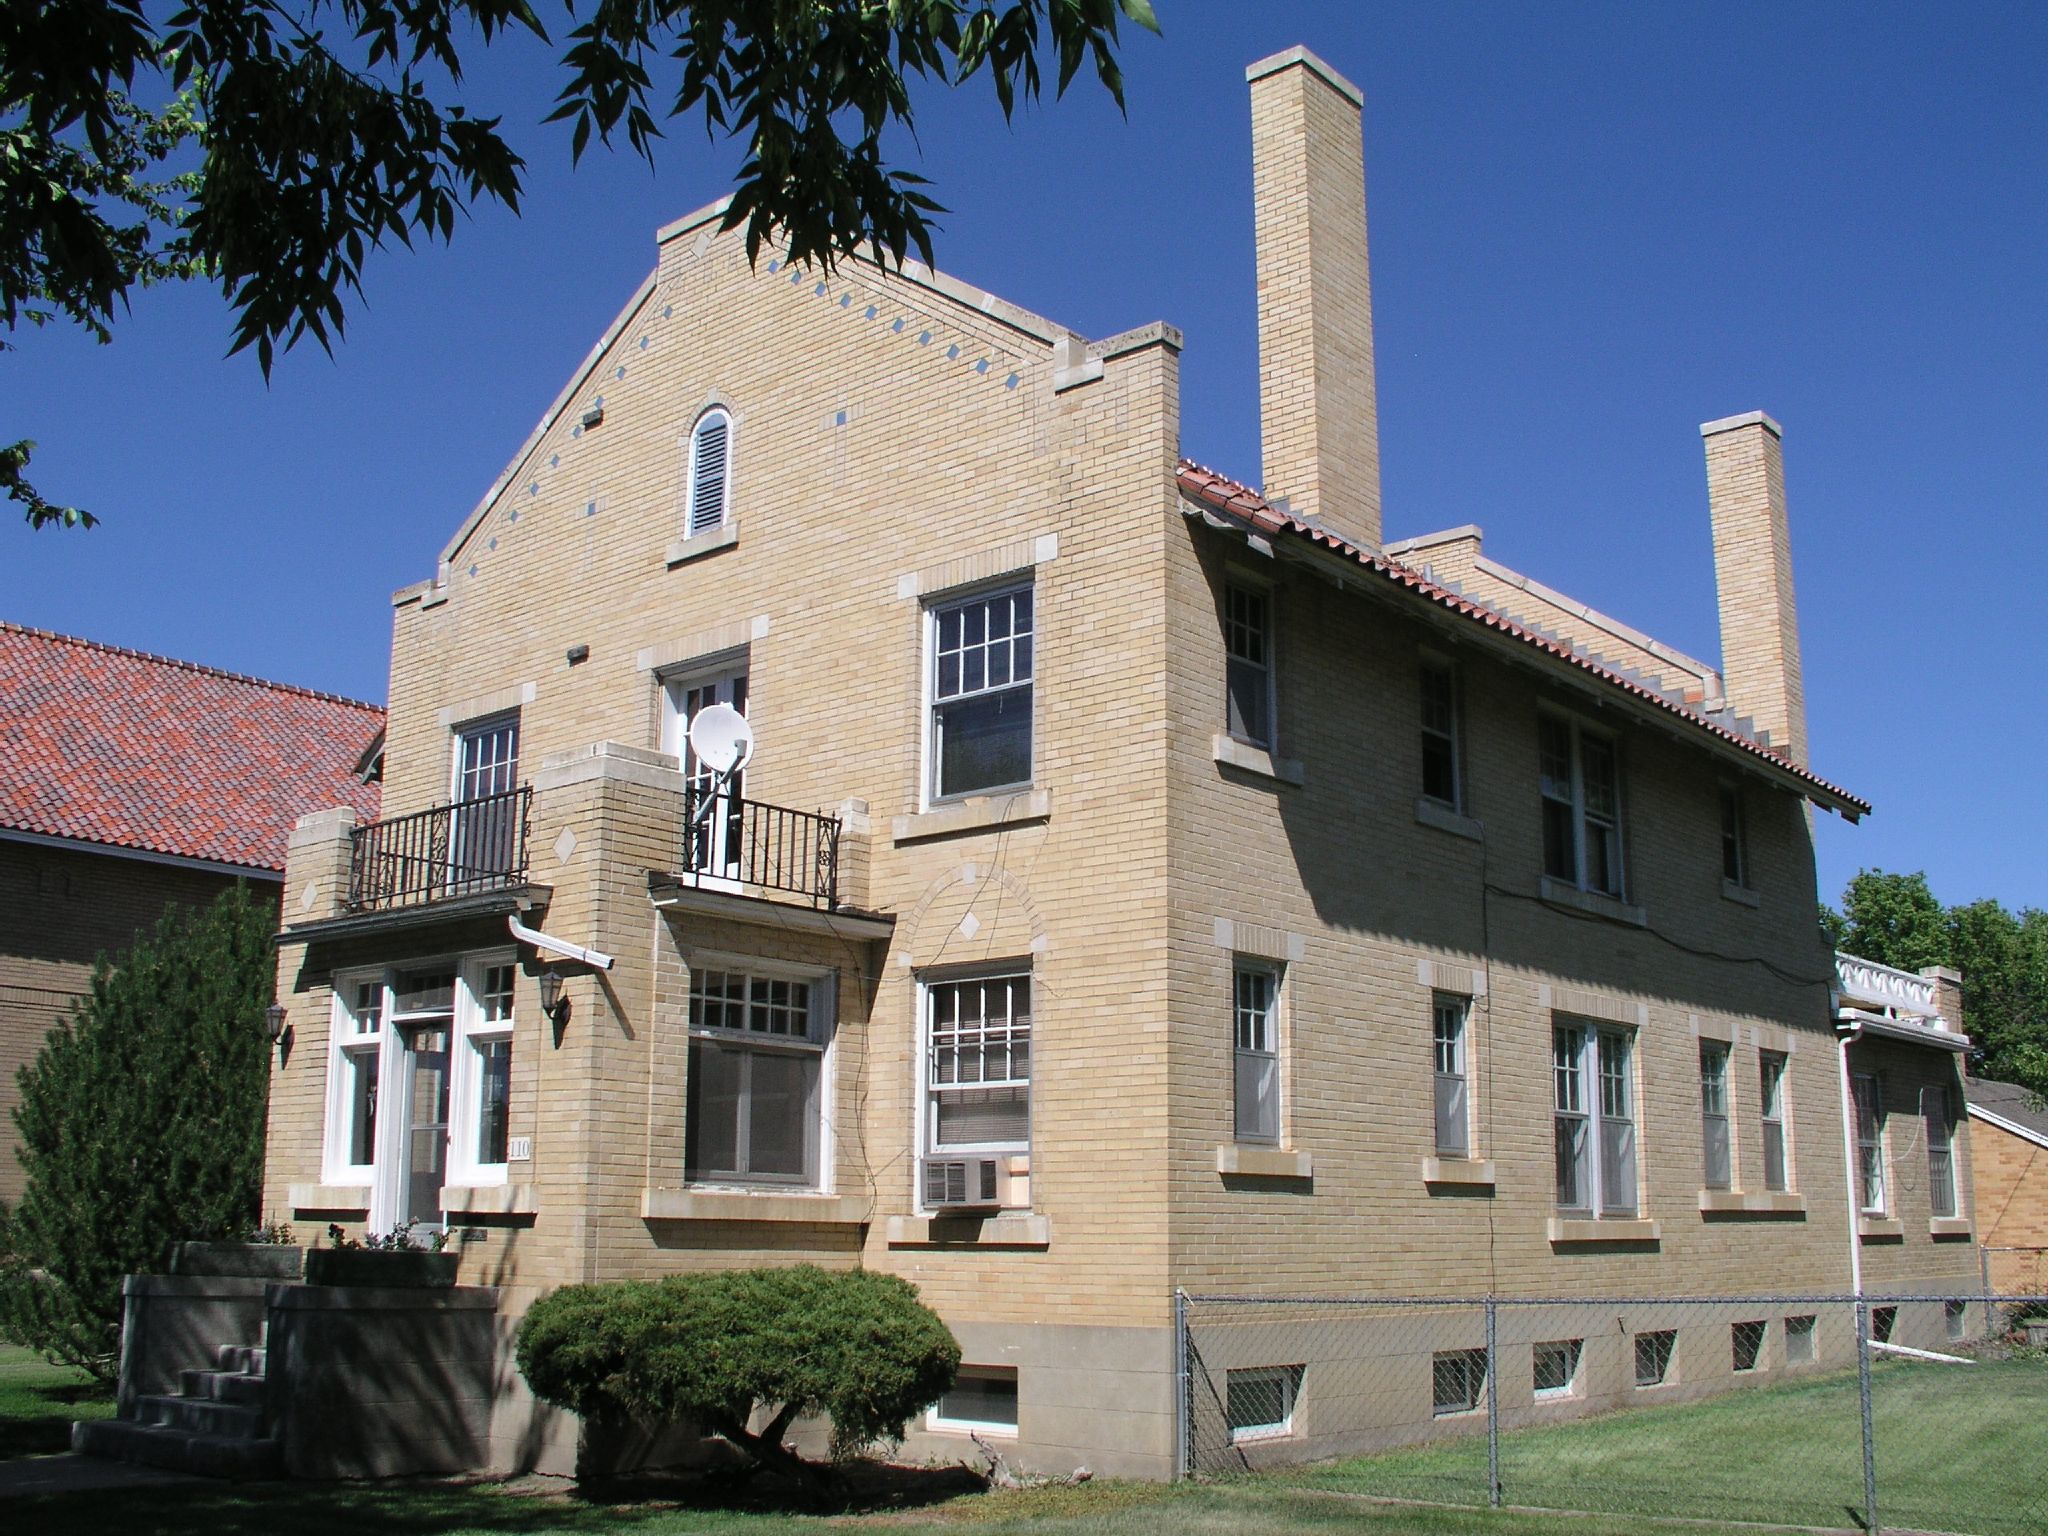 large brick house with three balconies in front of grassy area